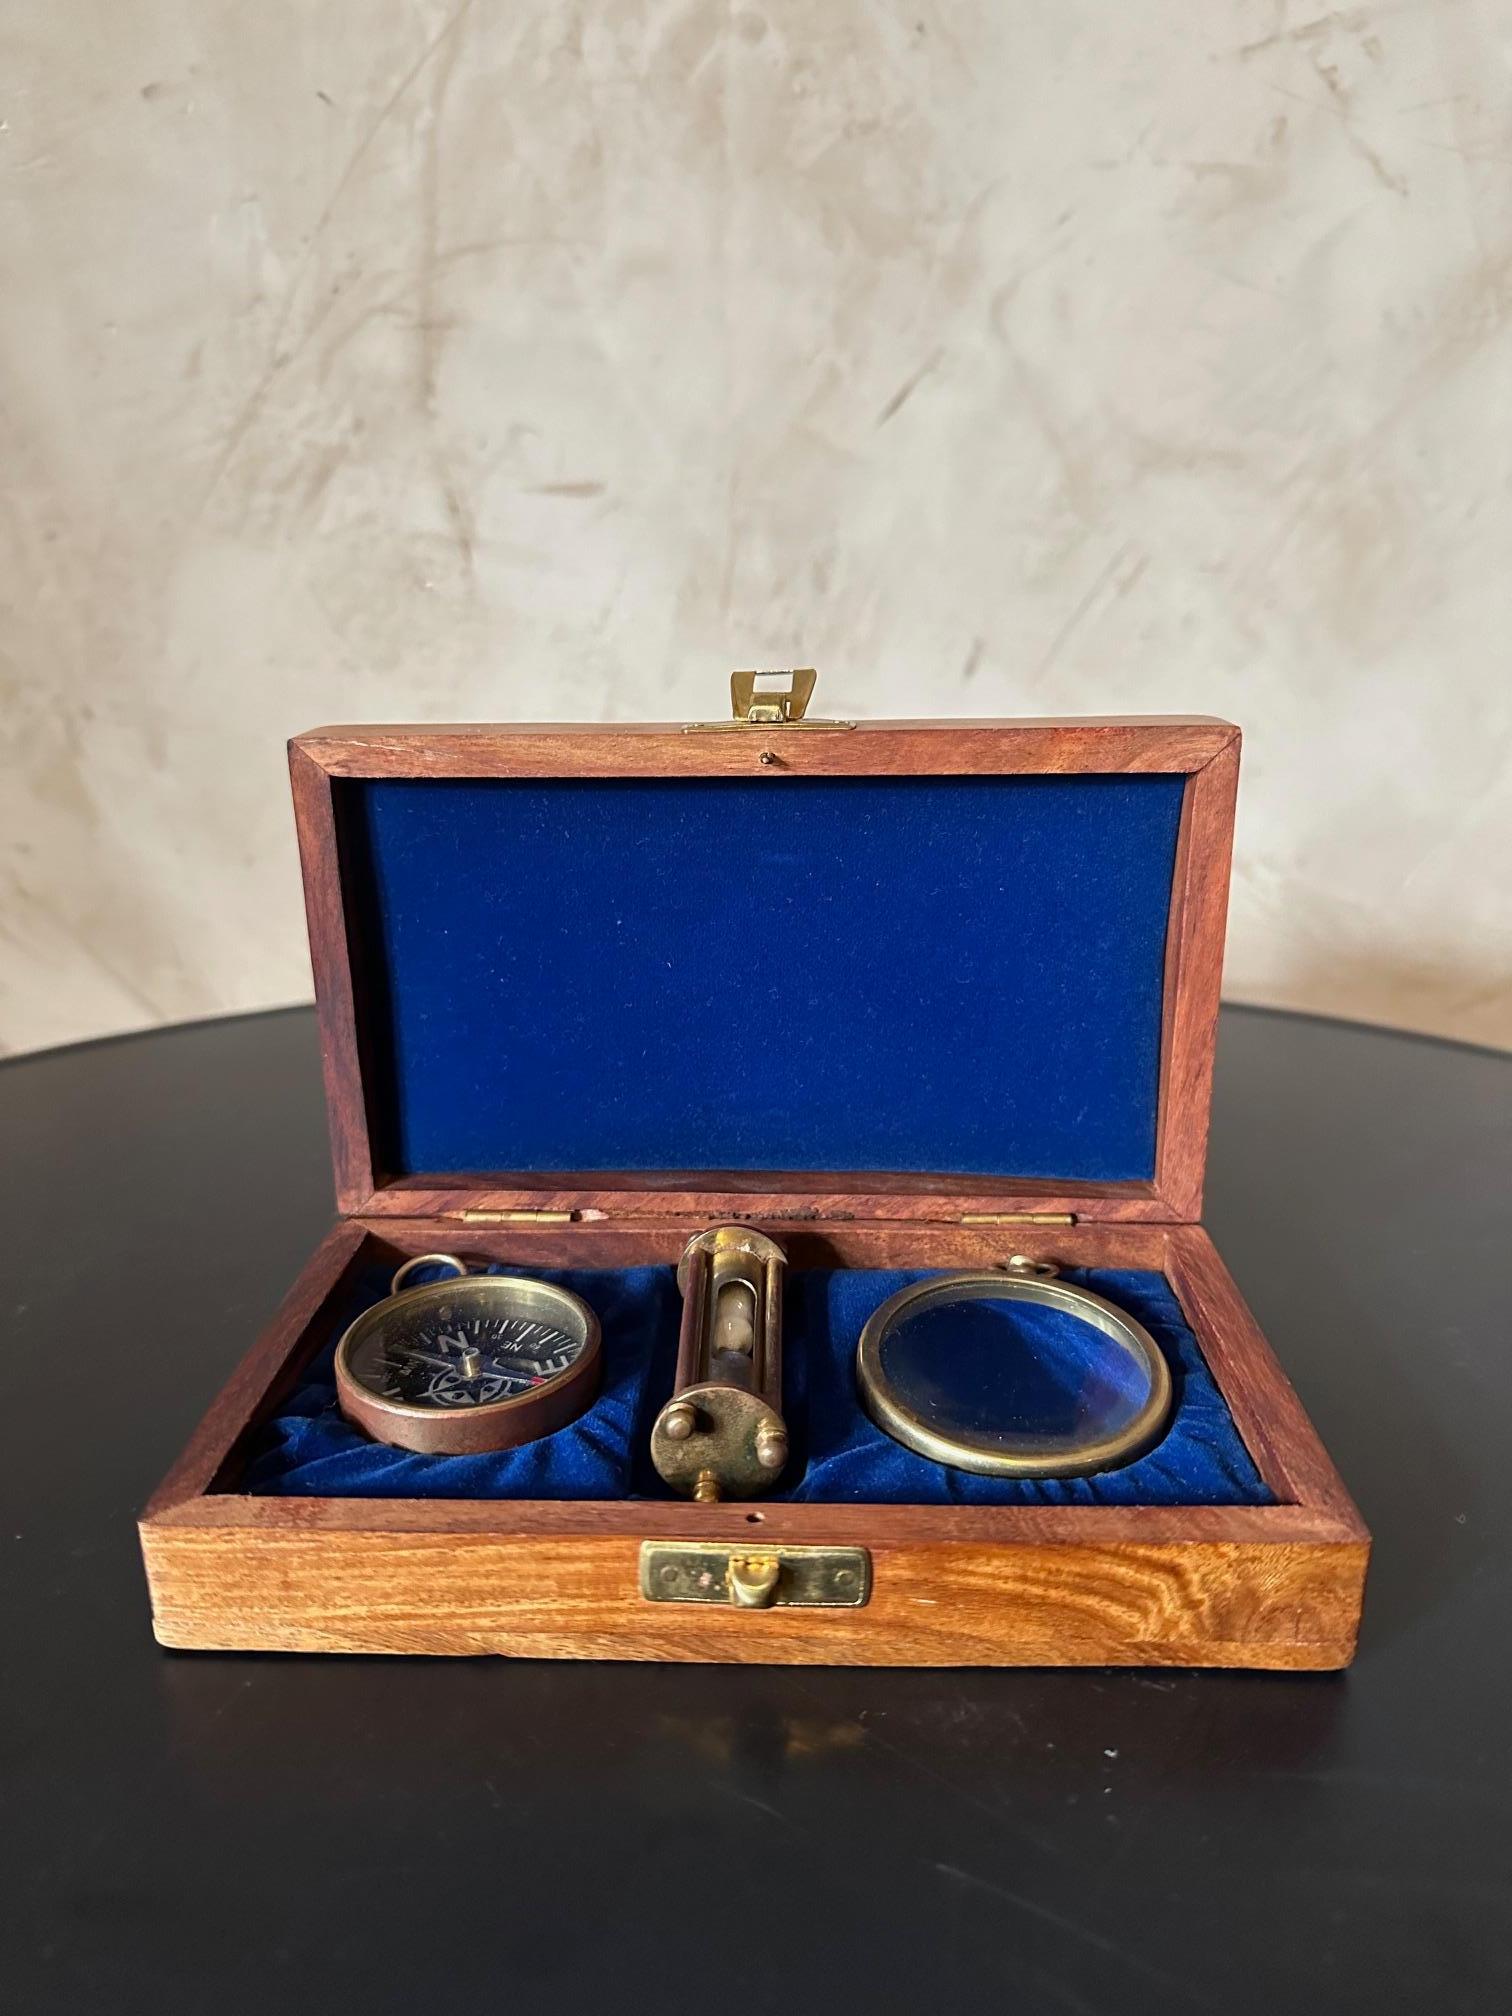 Small nautical wooden box dating from the 1950s composed of several brass objects, a compass, an hourglass and a magnifying glass. A boat anchor depicted on cover. Good quality and good condition.